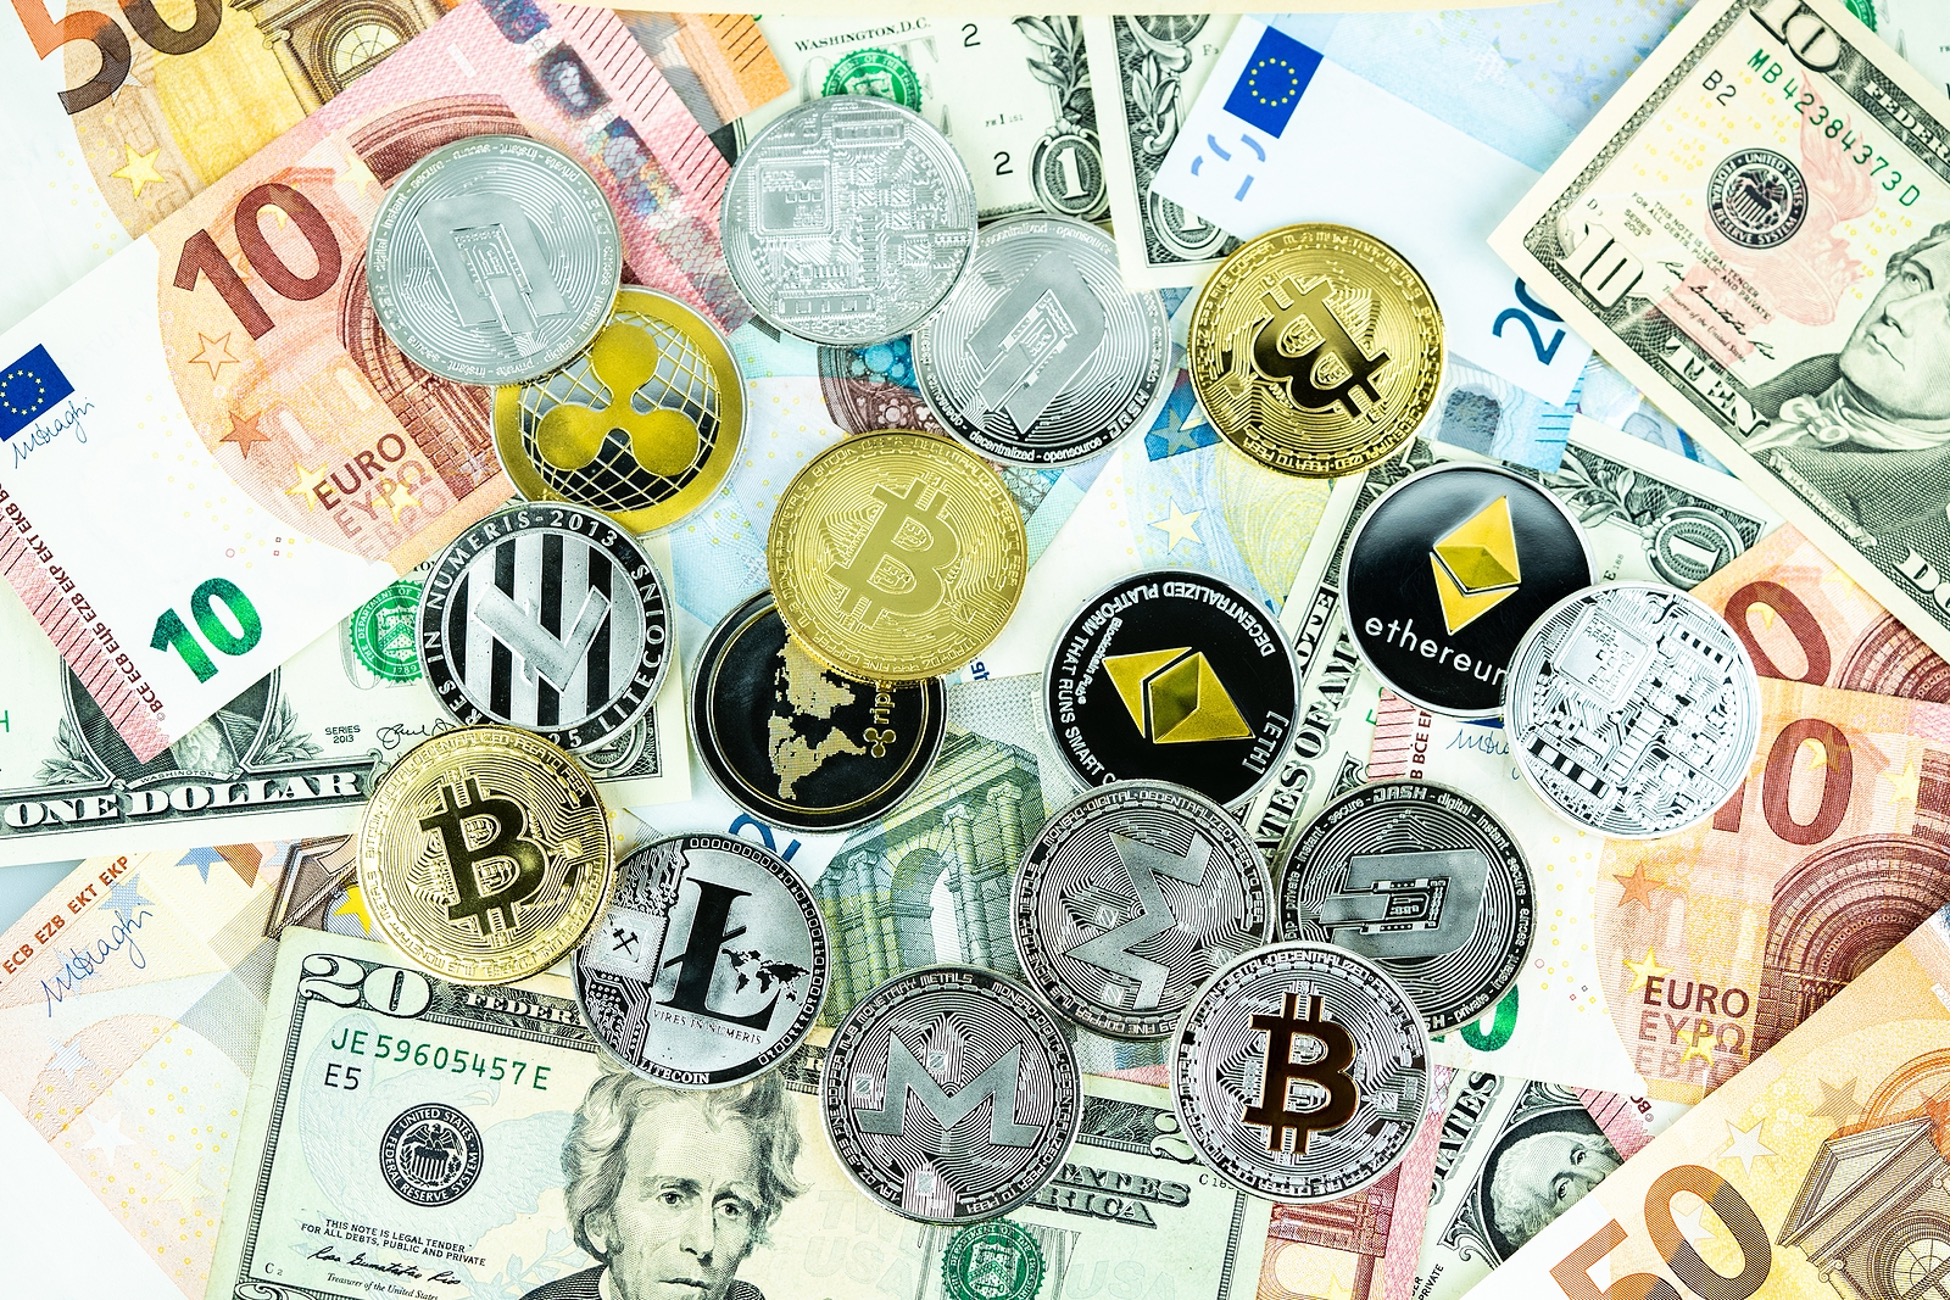 A digital currency - IMM Blog Image